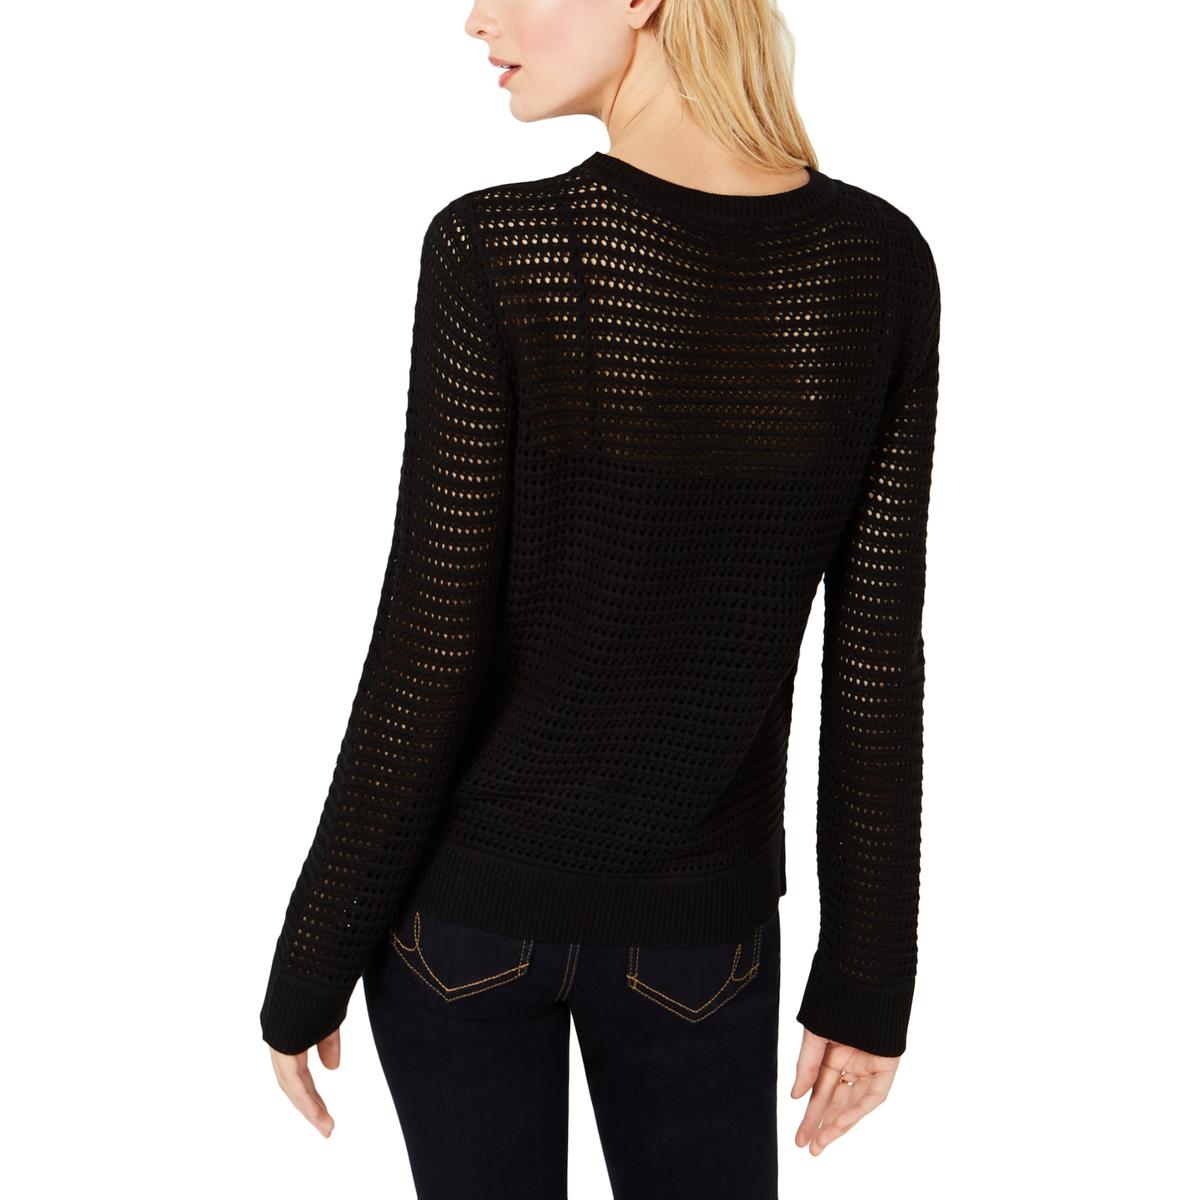 INC Womens Perforated Pullover Shirt Crewneck Sweater Top BHFO 0020 